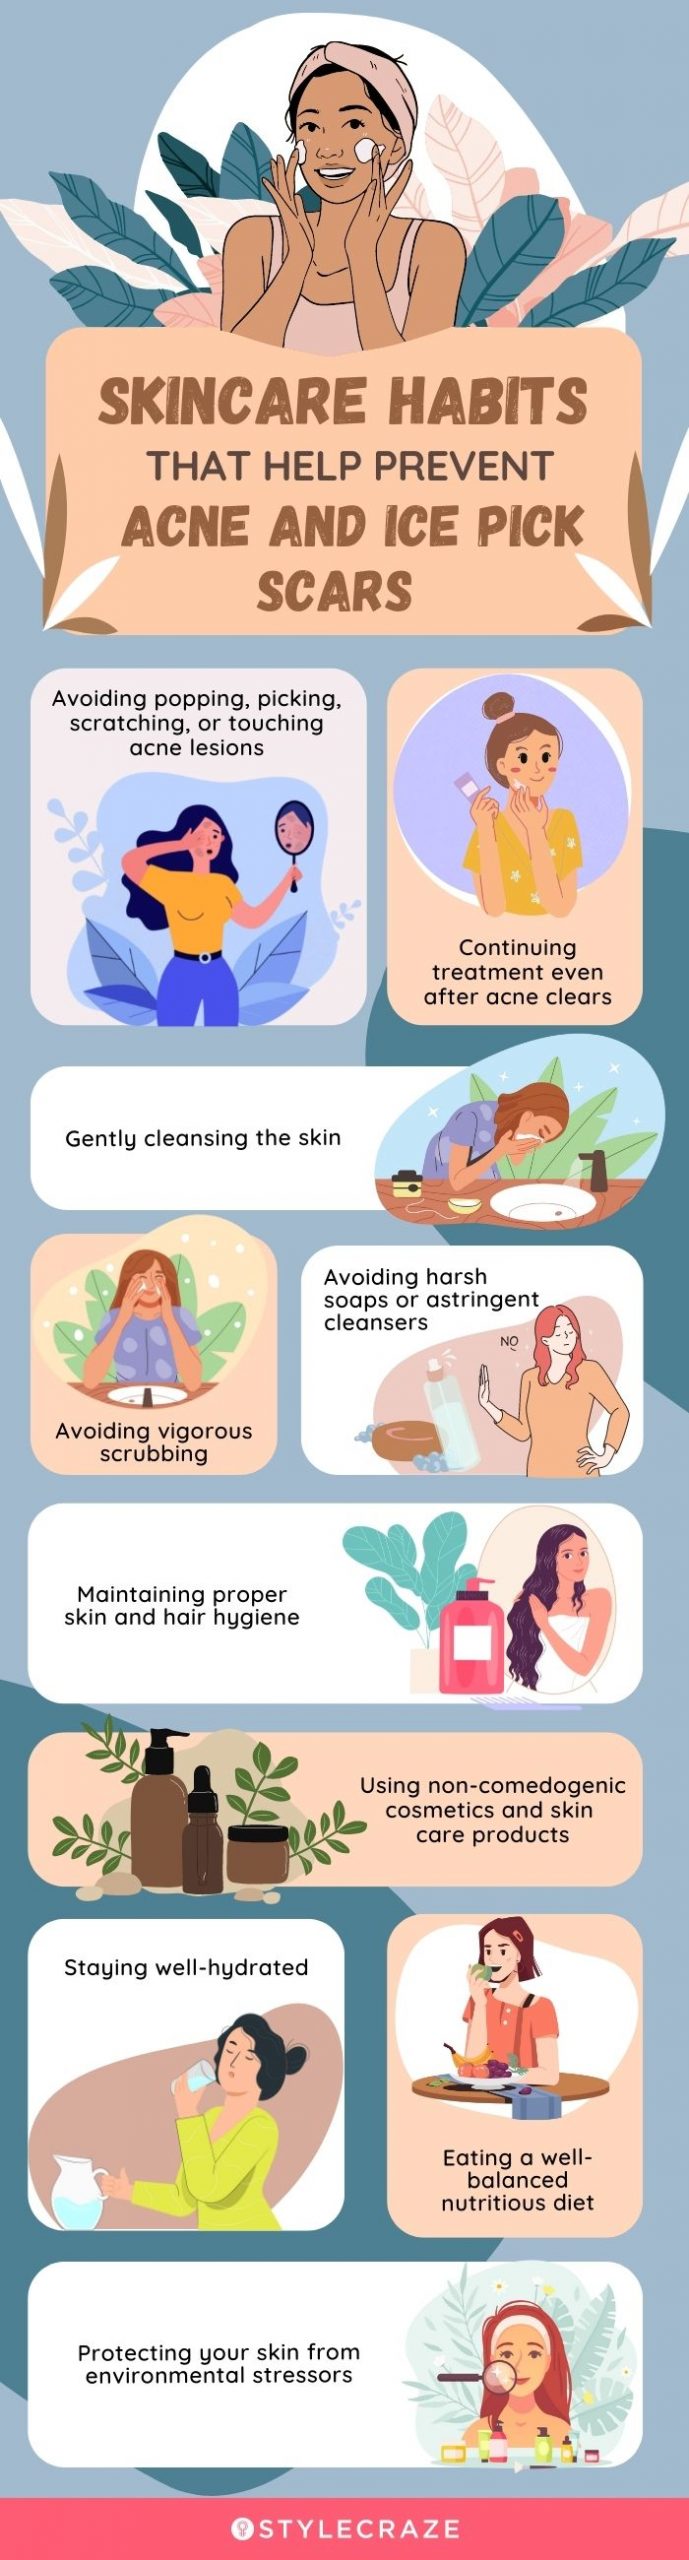 skincare habits that help prevent acne and ice pick scars (infographic)